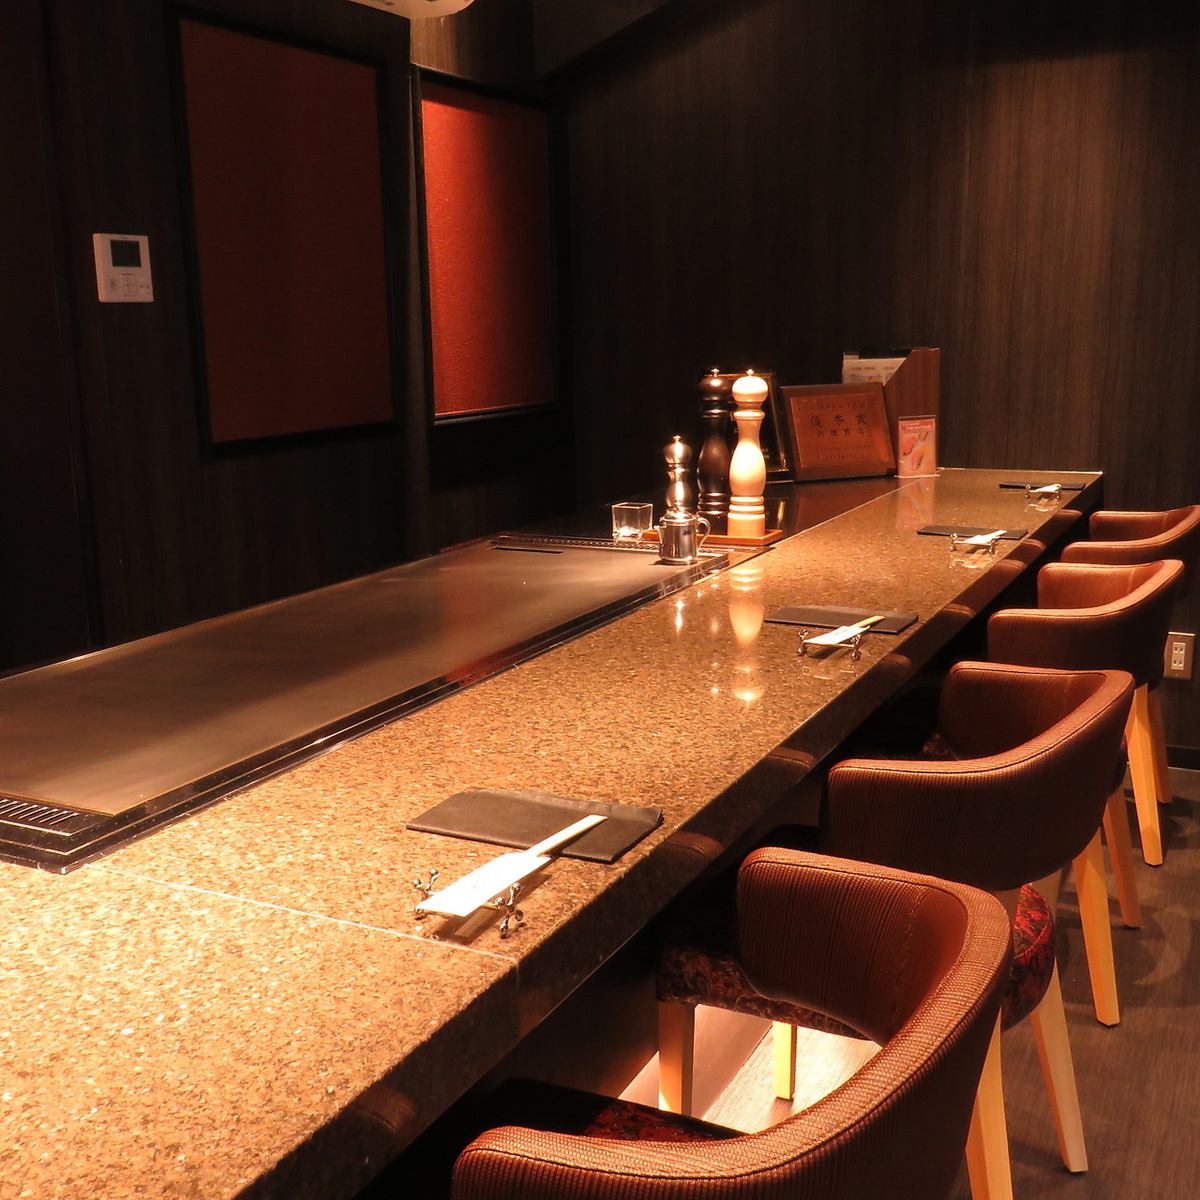 Please enjoy the finest wagyu beef to your heart's content in a completely private room.